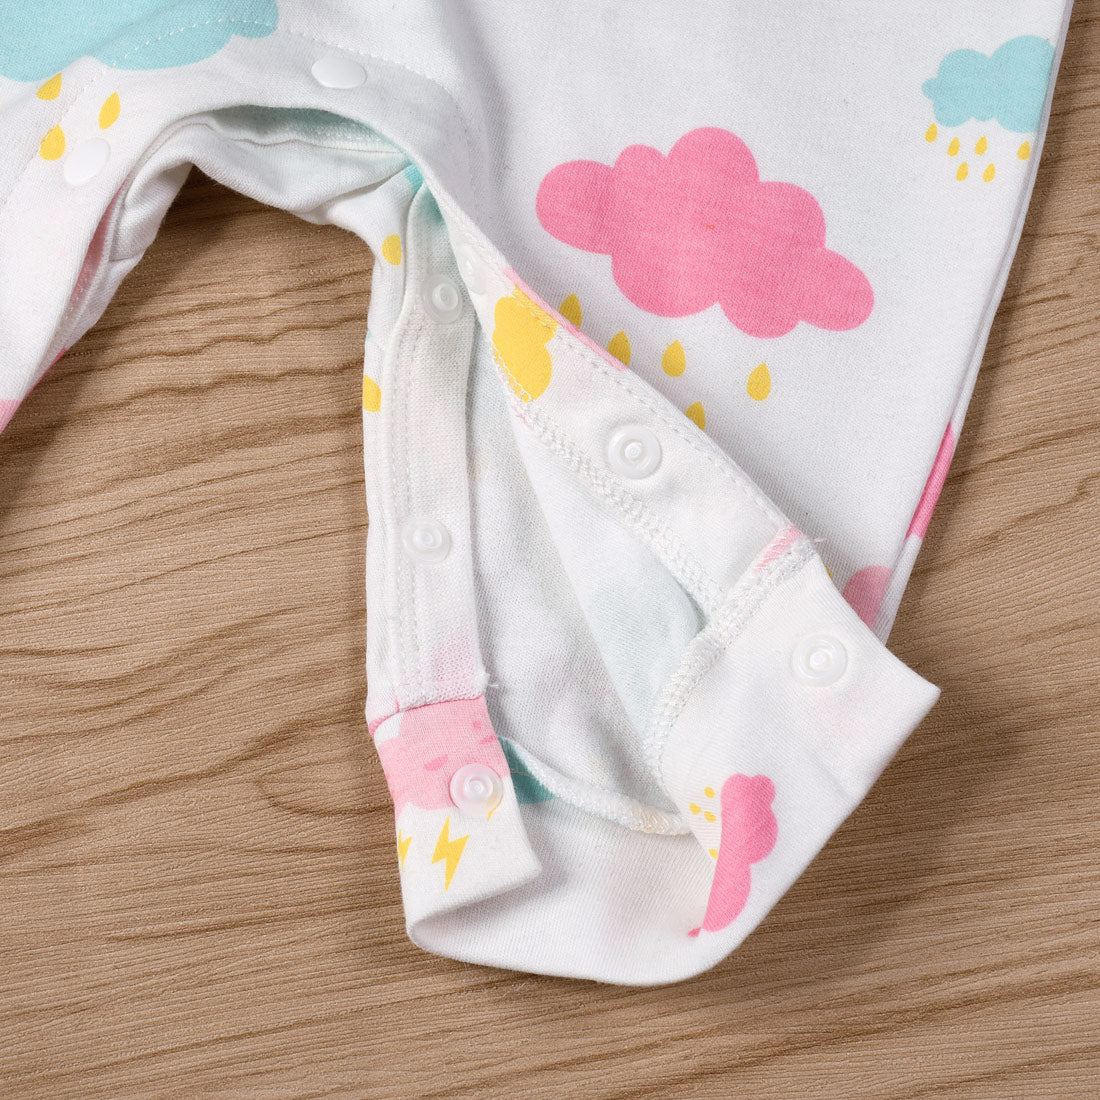 Baby Girl Colorful Clouds All In One Jumpsuit - Little Kooma